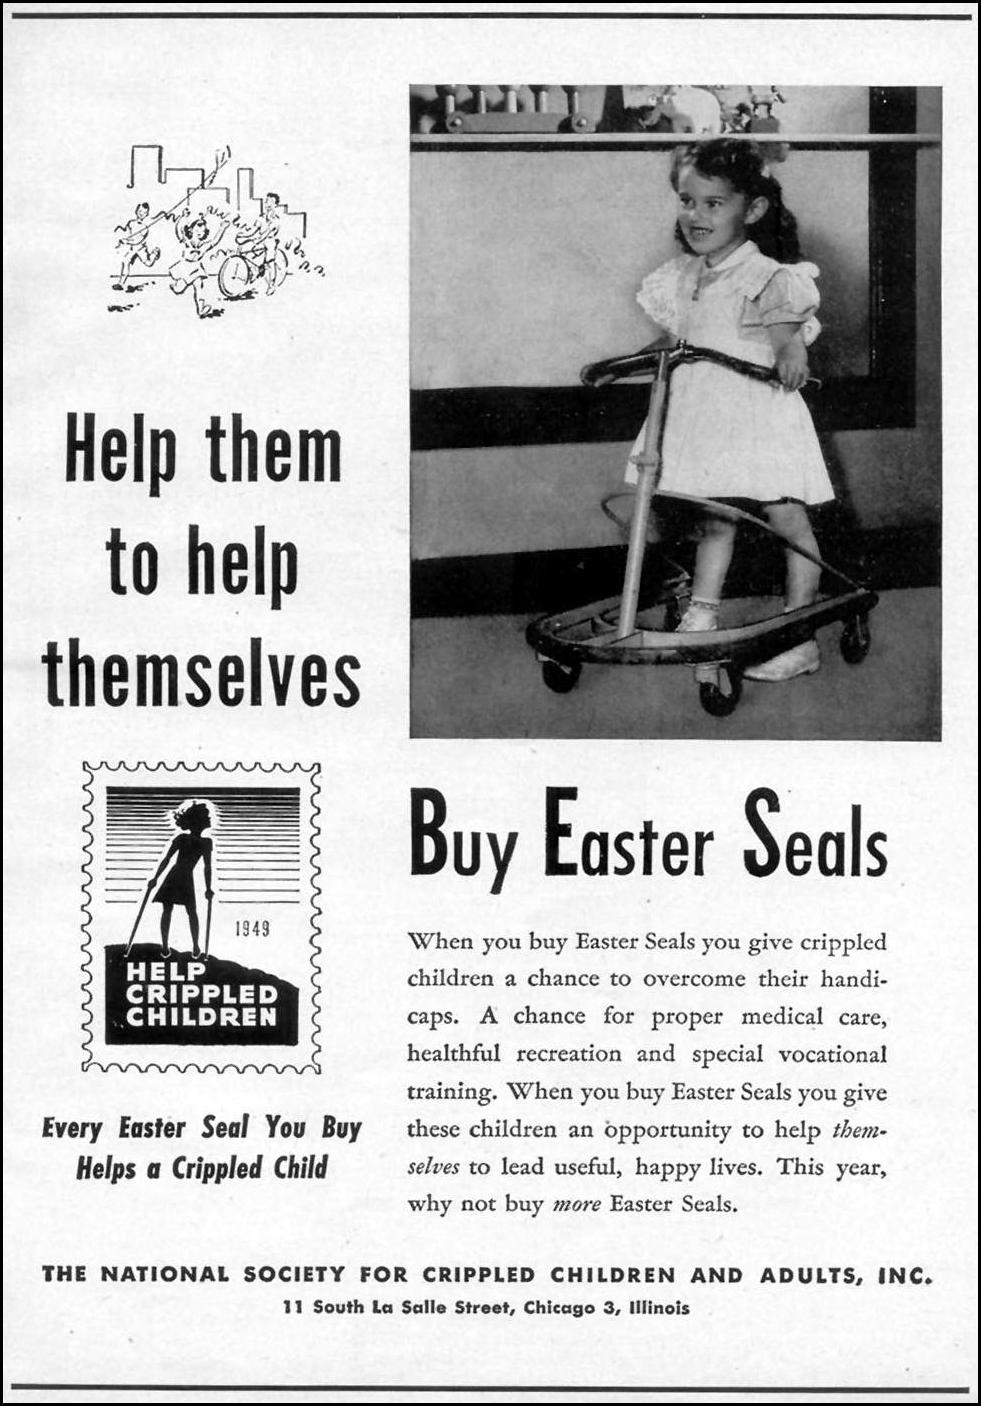 EASTER SEALS
WOMAN'S DAY
03/01/1949
p. 135